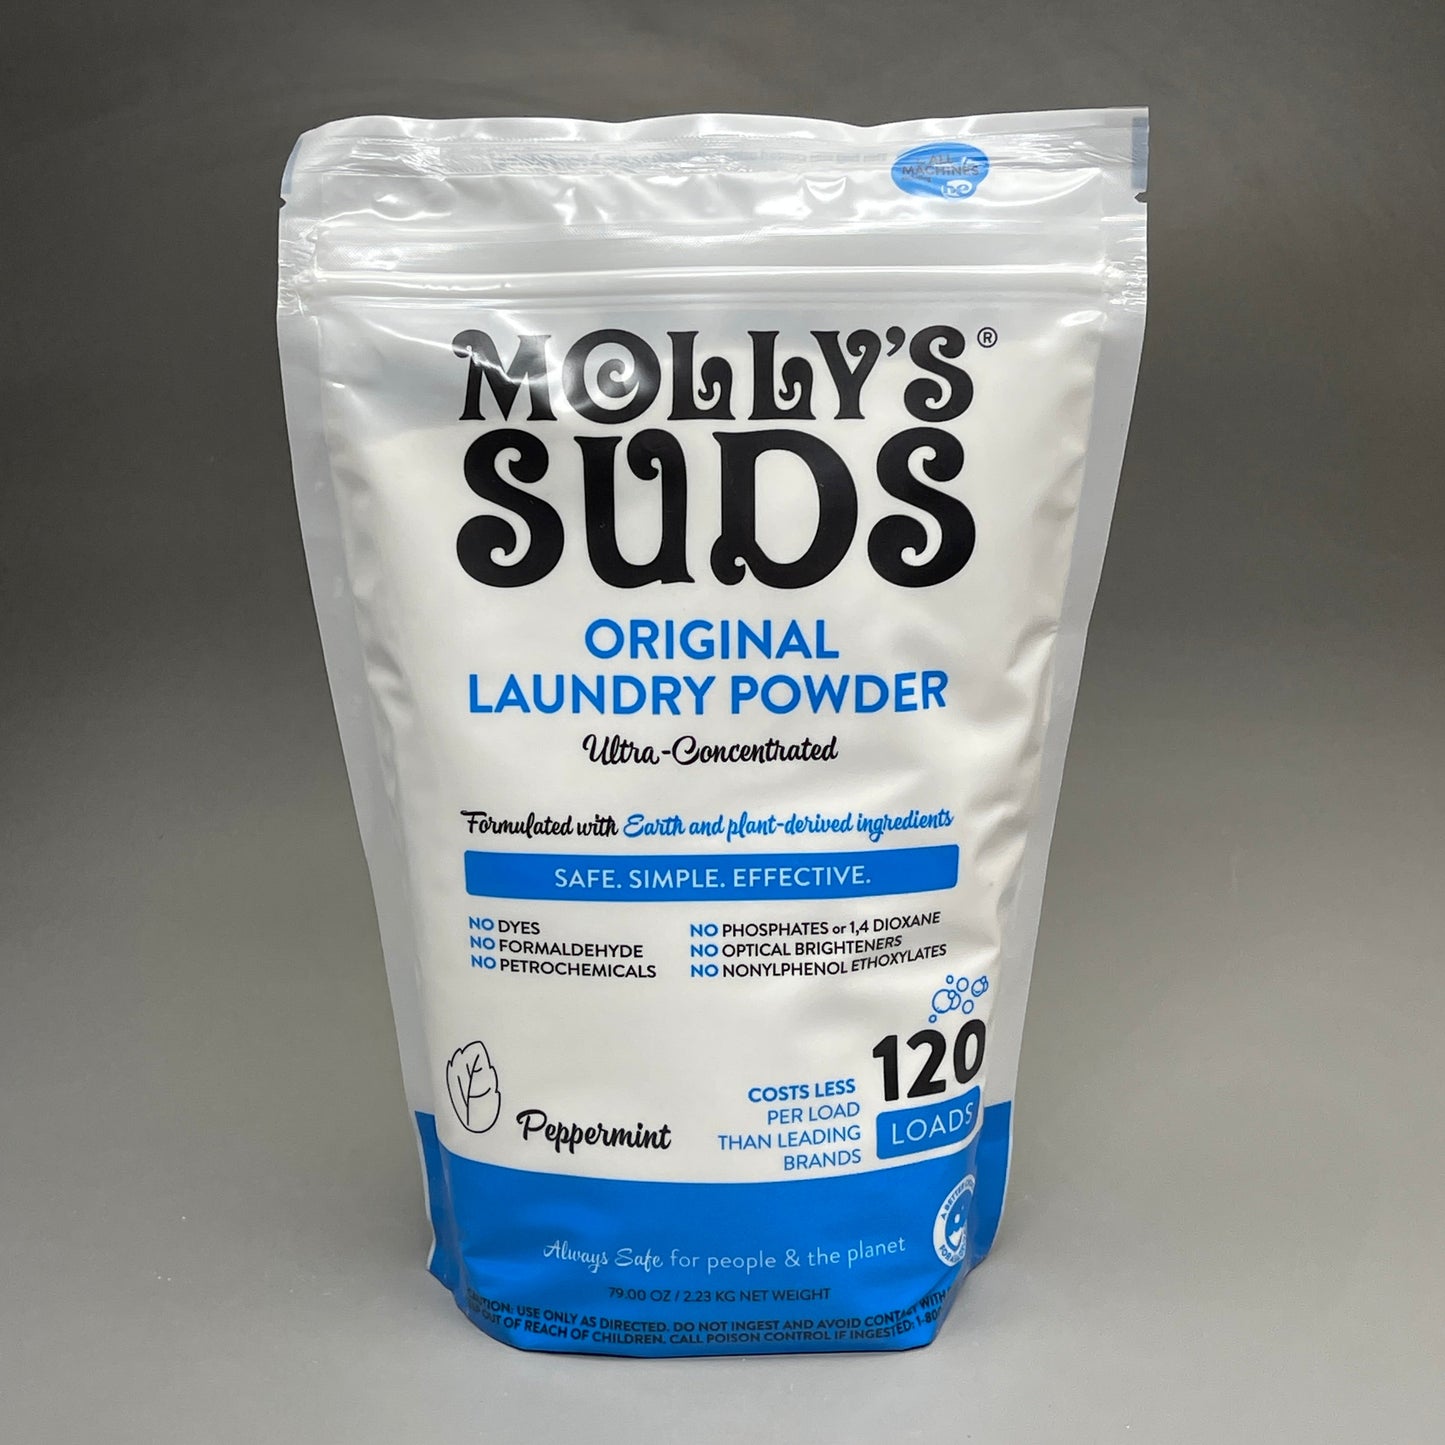 ZA@ MOLLY'S SUDS (12 PACK) Original Laundry Powder Ultra-Concentrated Peppermint 79 oz 120 Loads